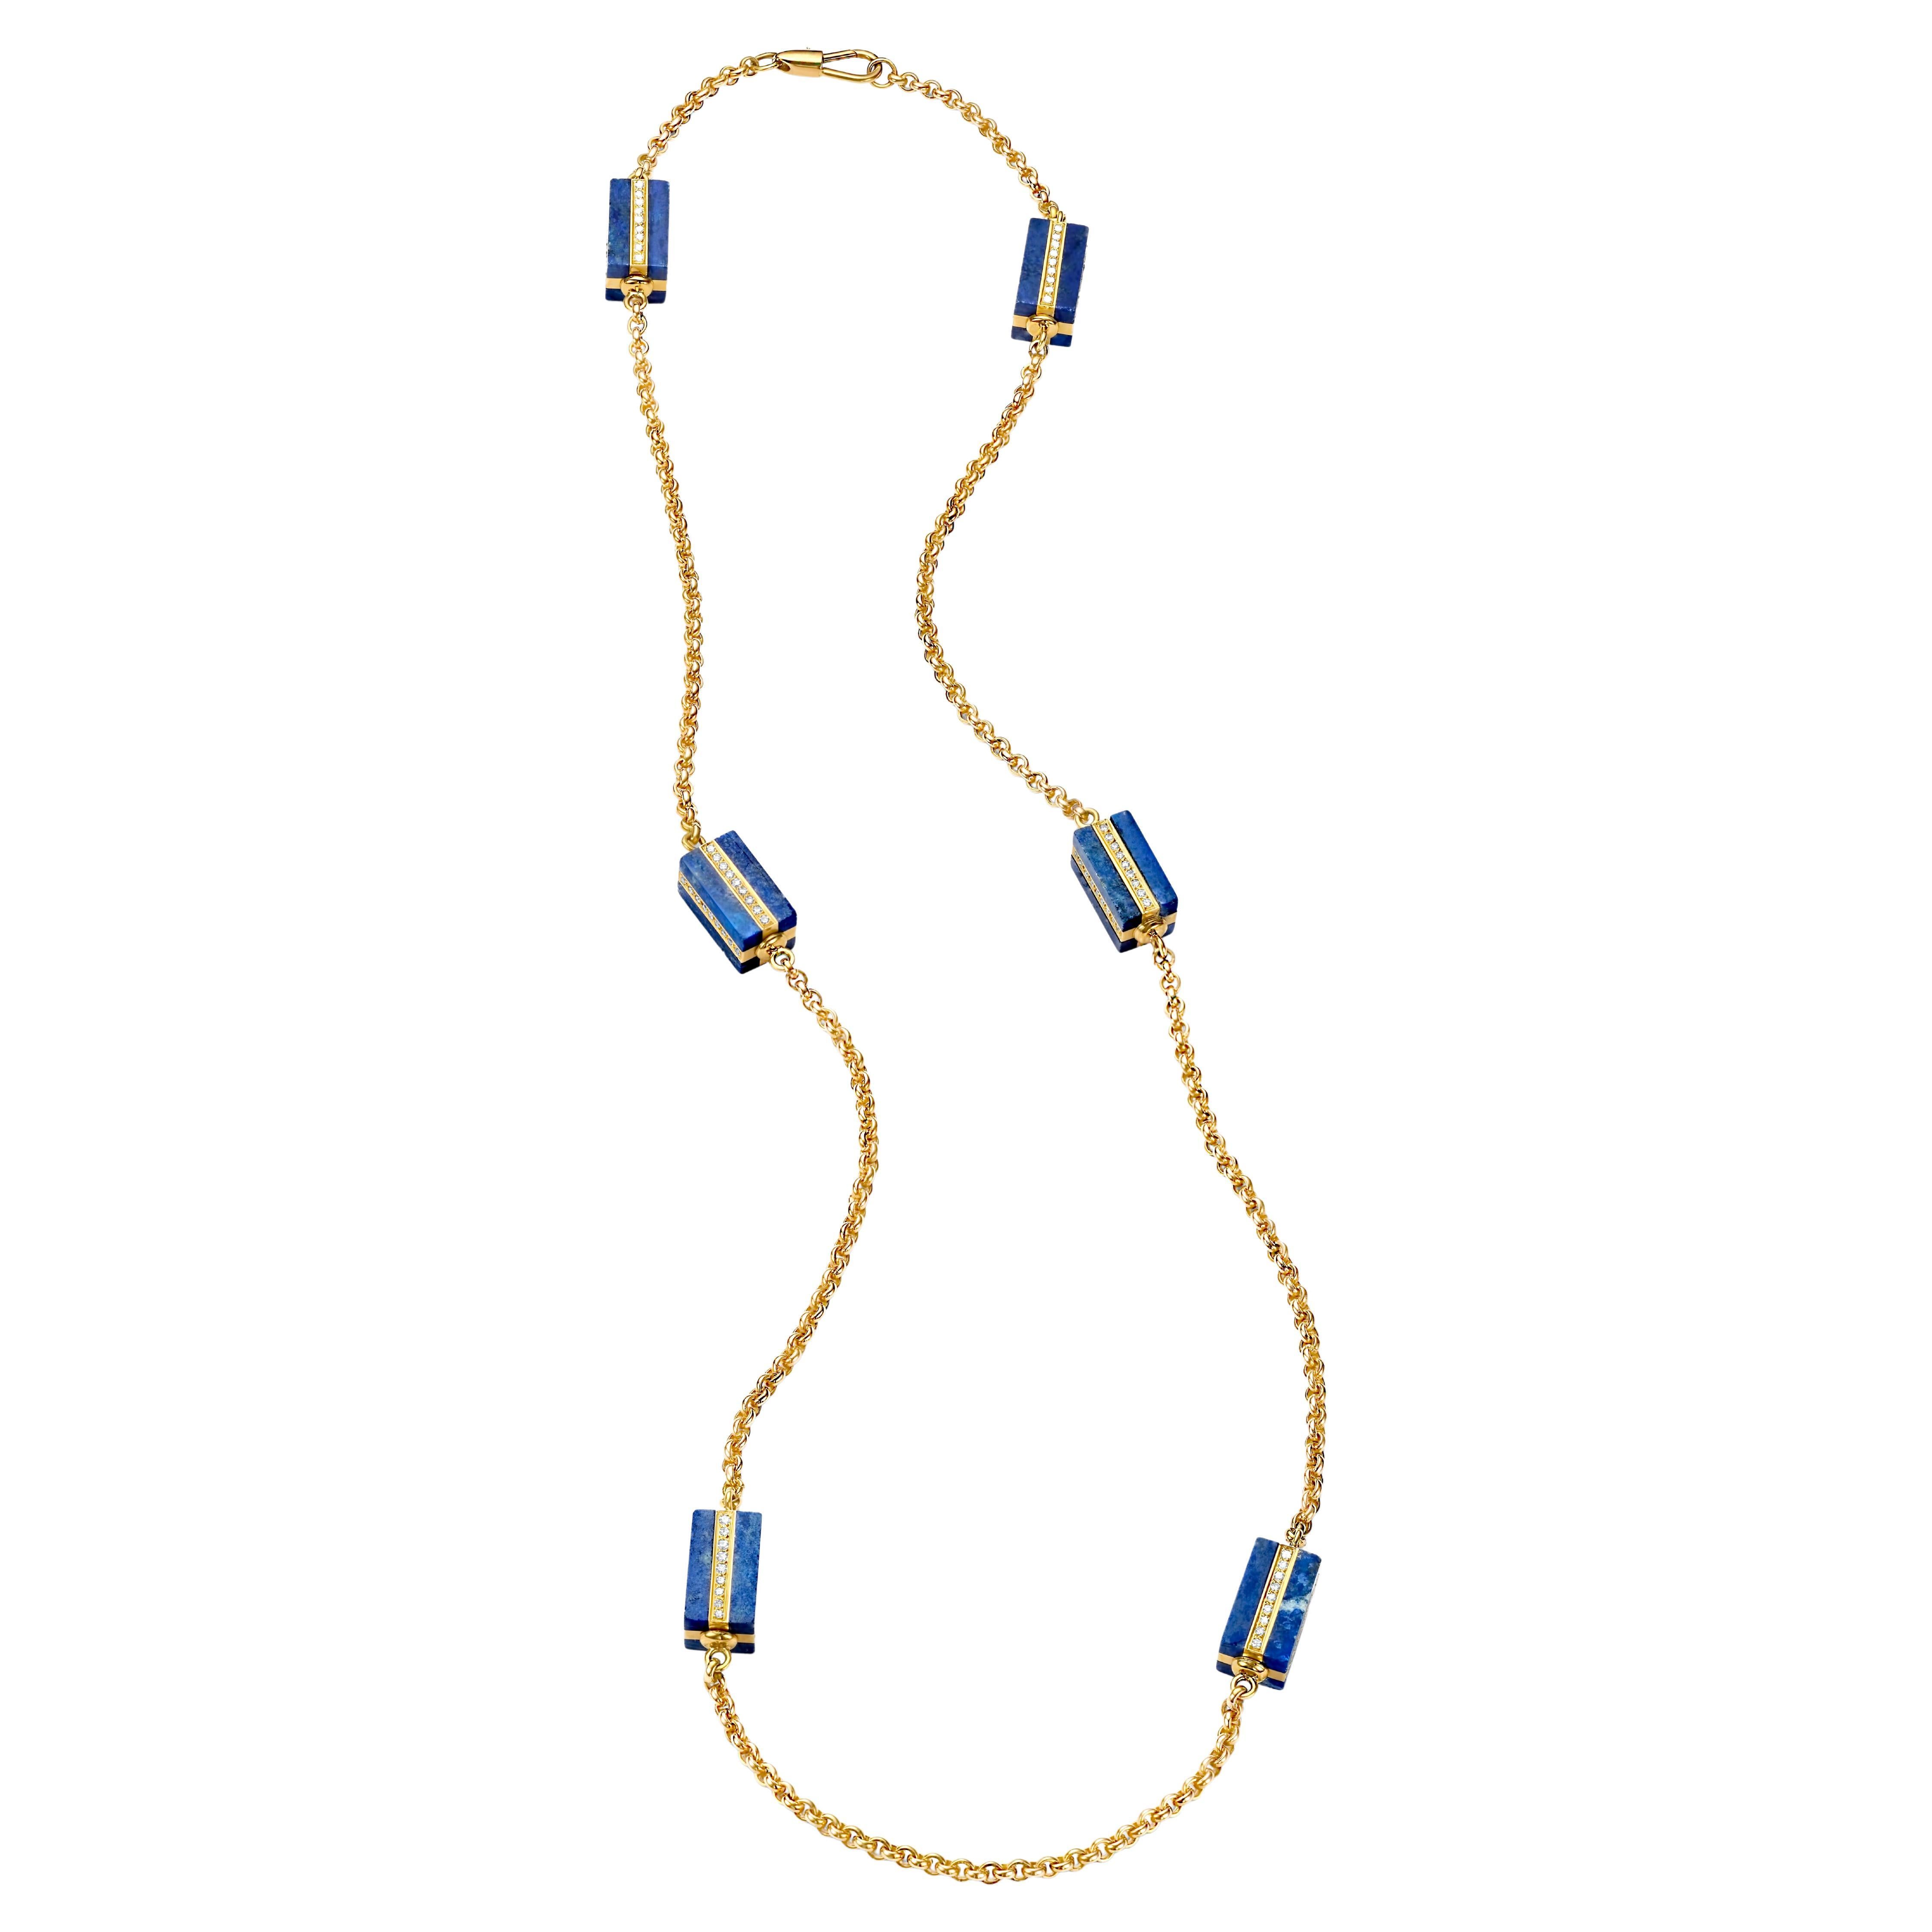 Long Necklace with Lapis Lazuli and 4.32 Ct Diamonds, Estate Sultan Oman Qaboos